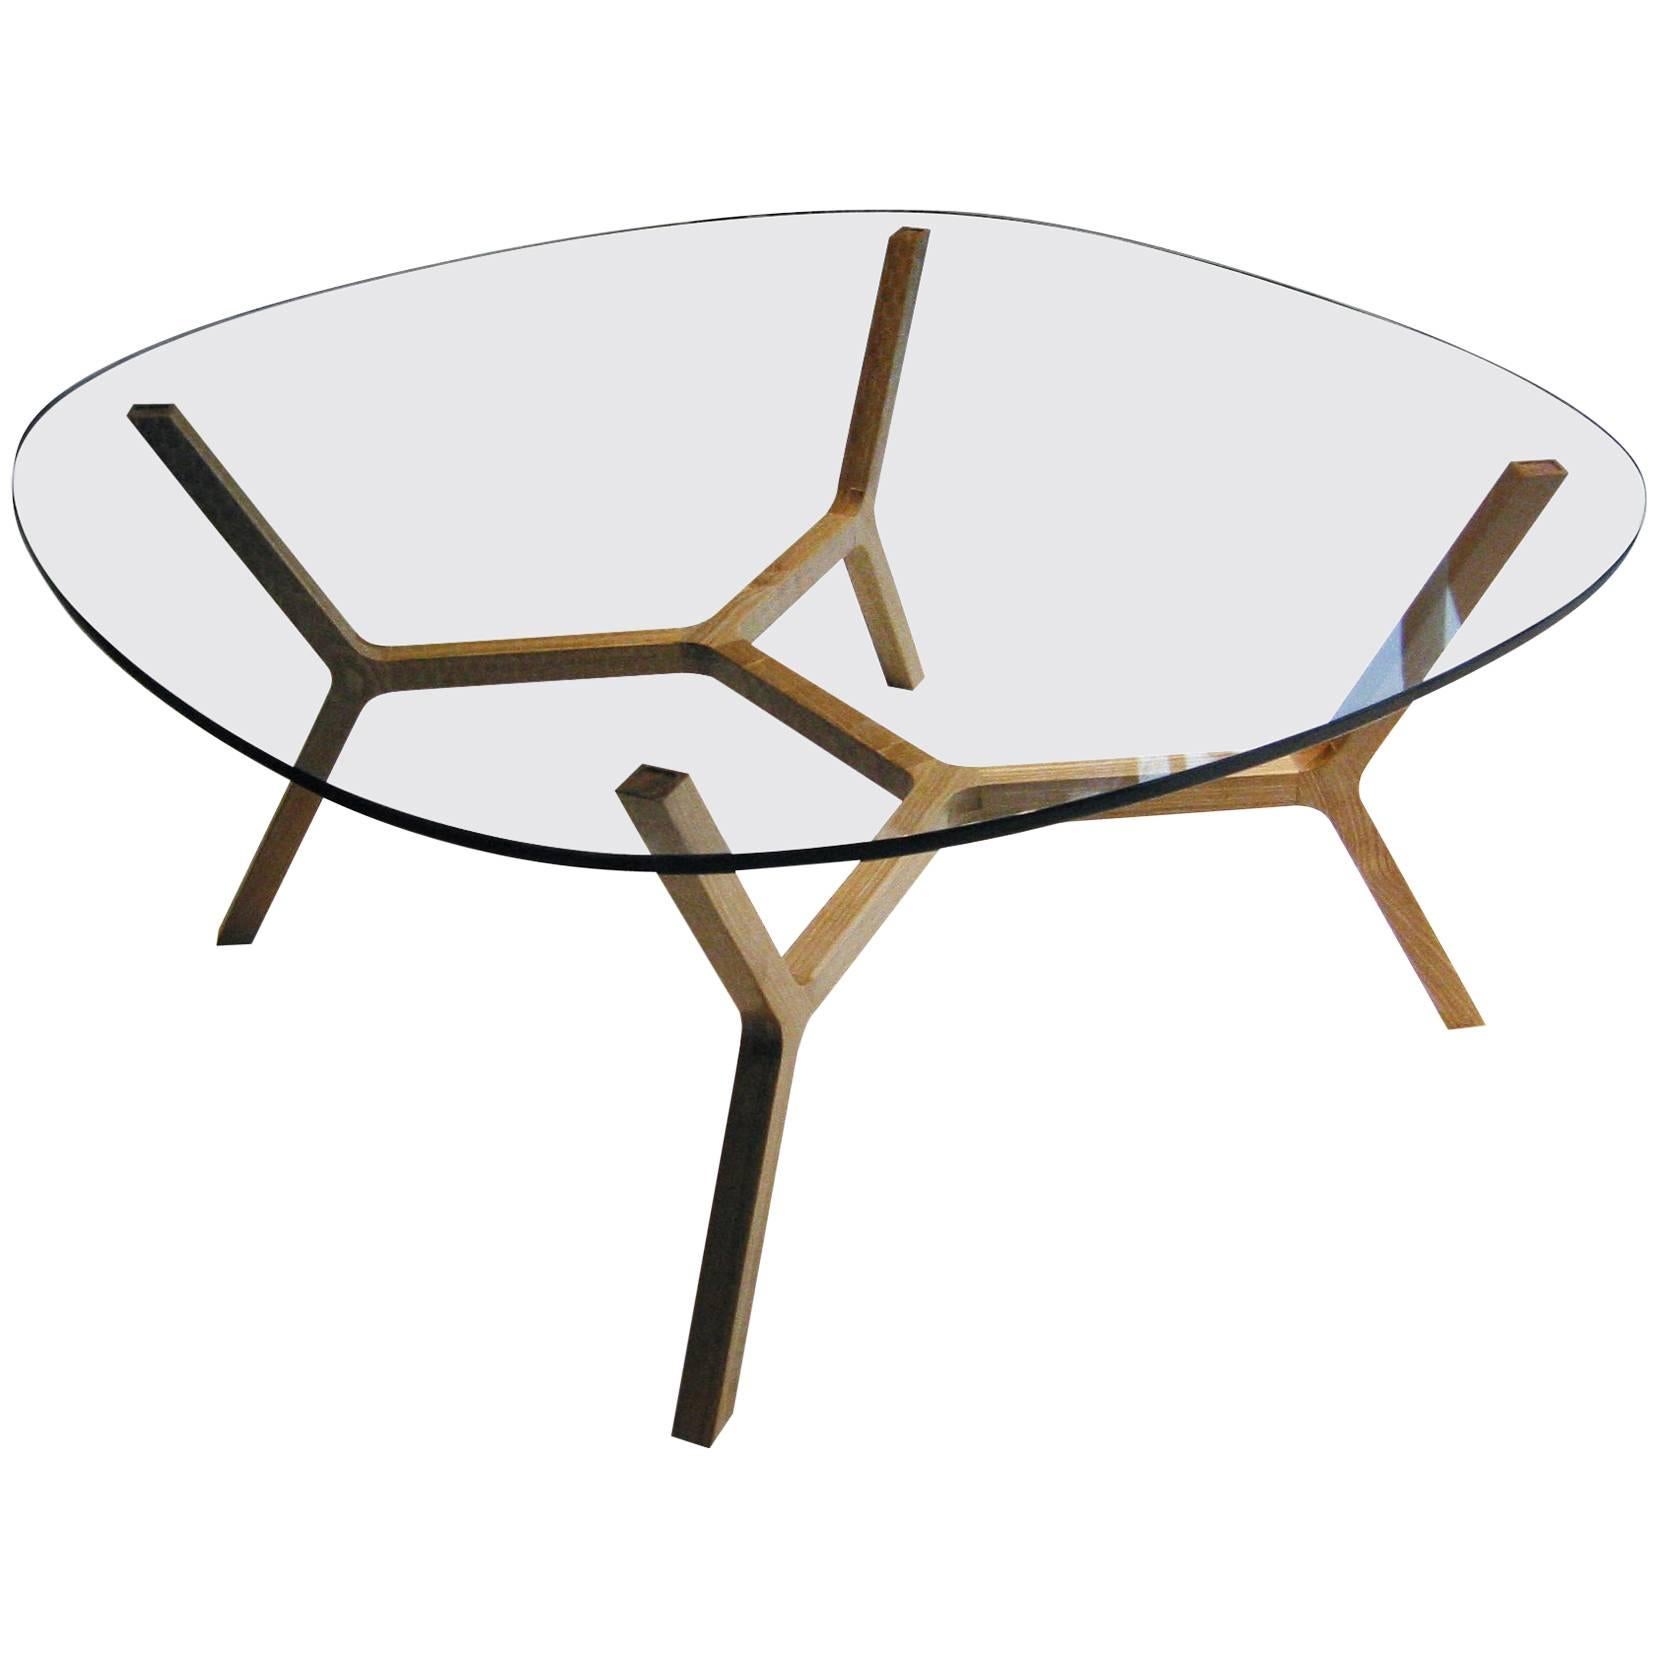 Contemporary Coffee Table "Stick" Four Legs in White Oak by Casey Lurie USA